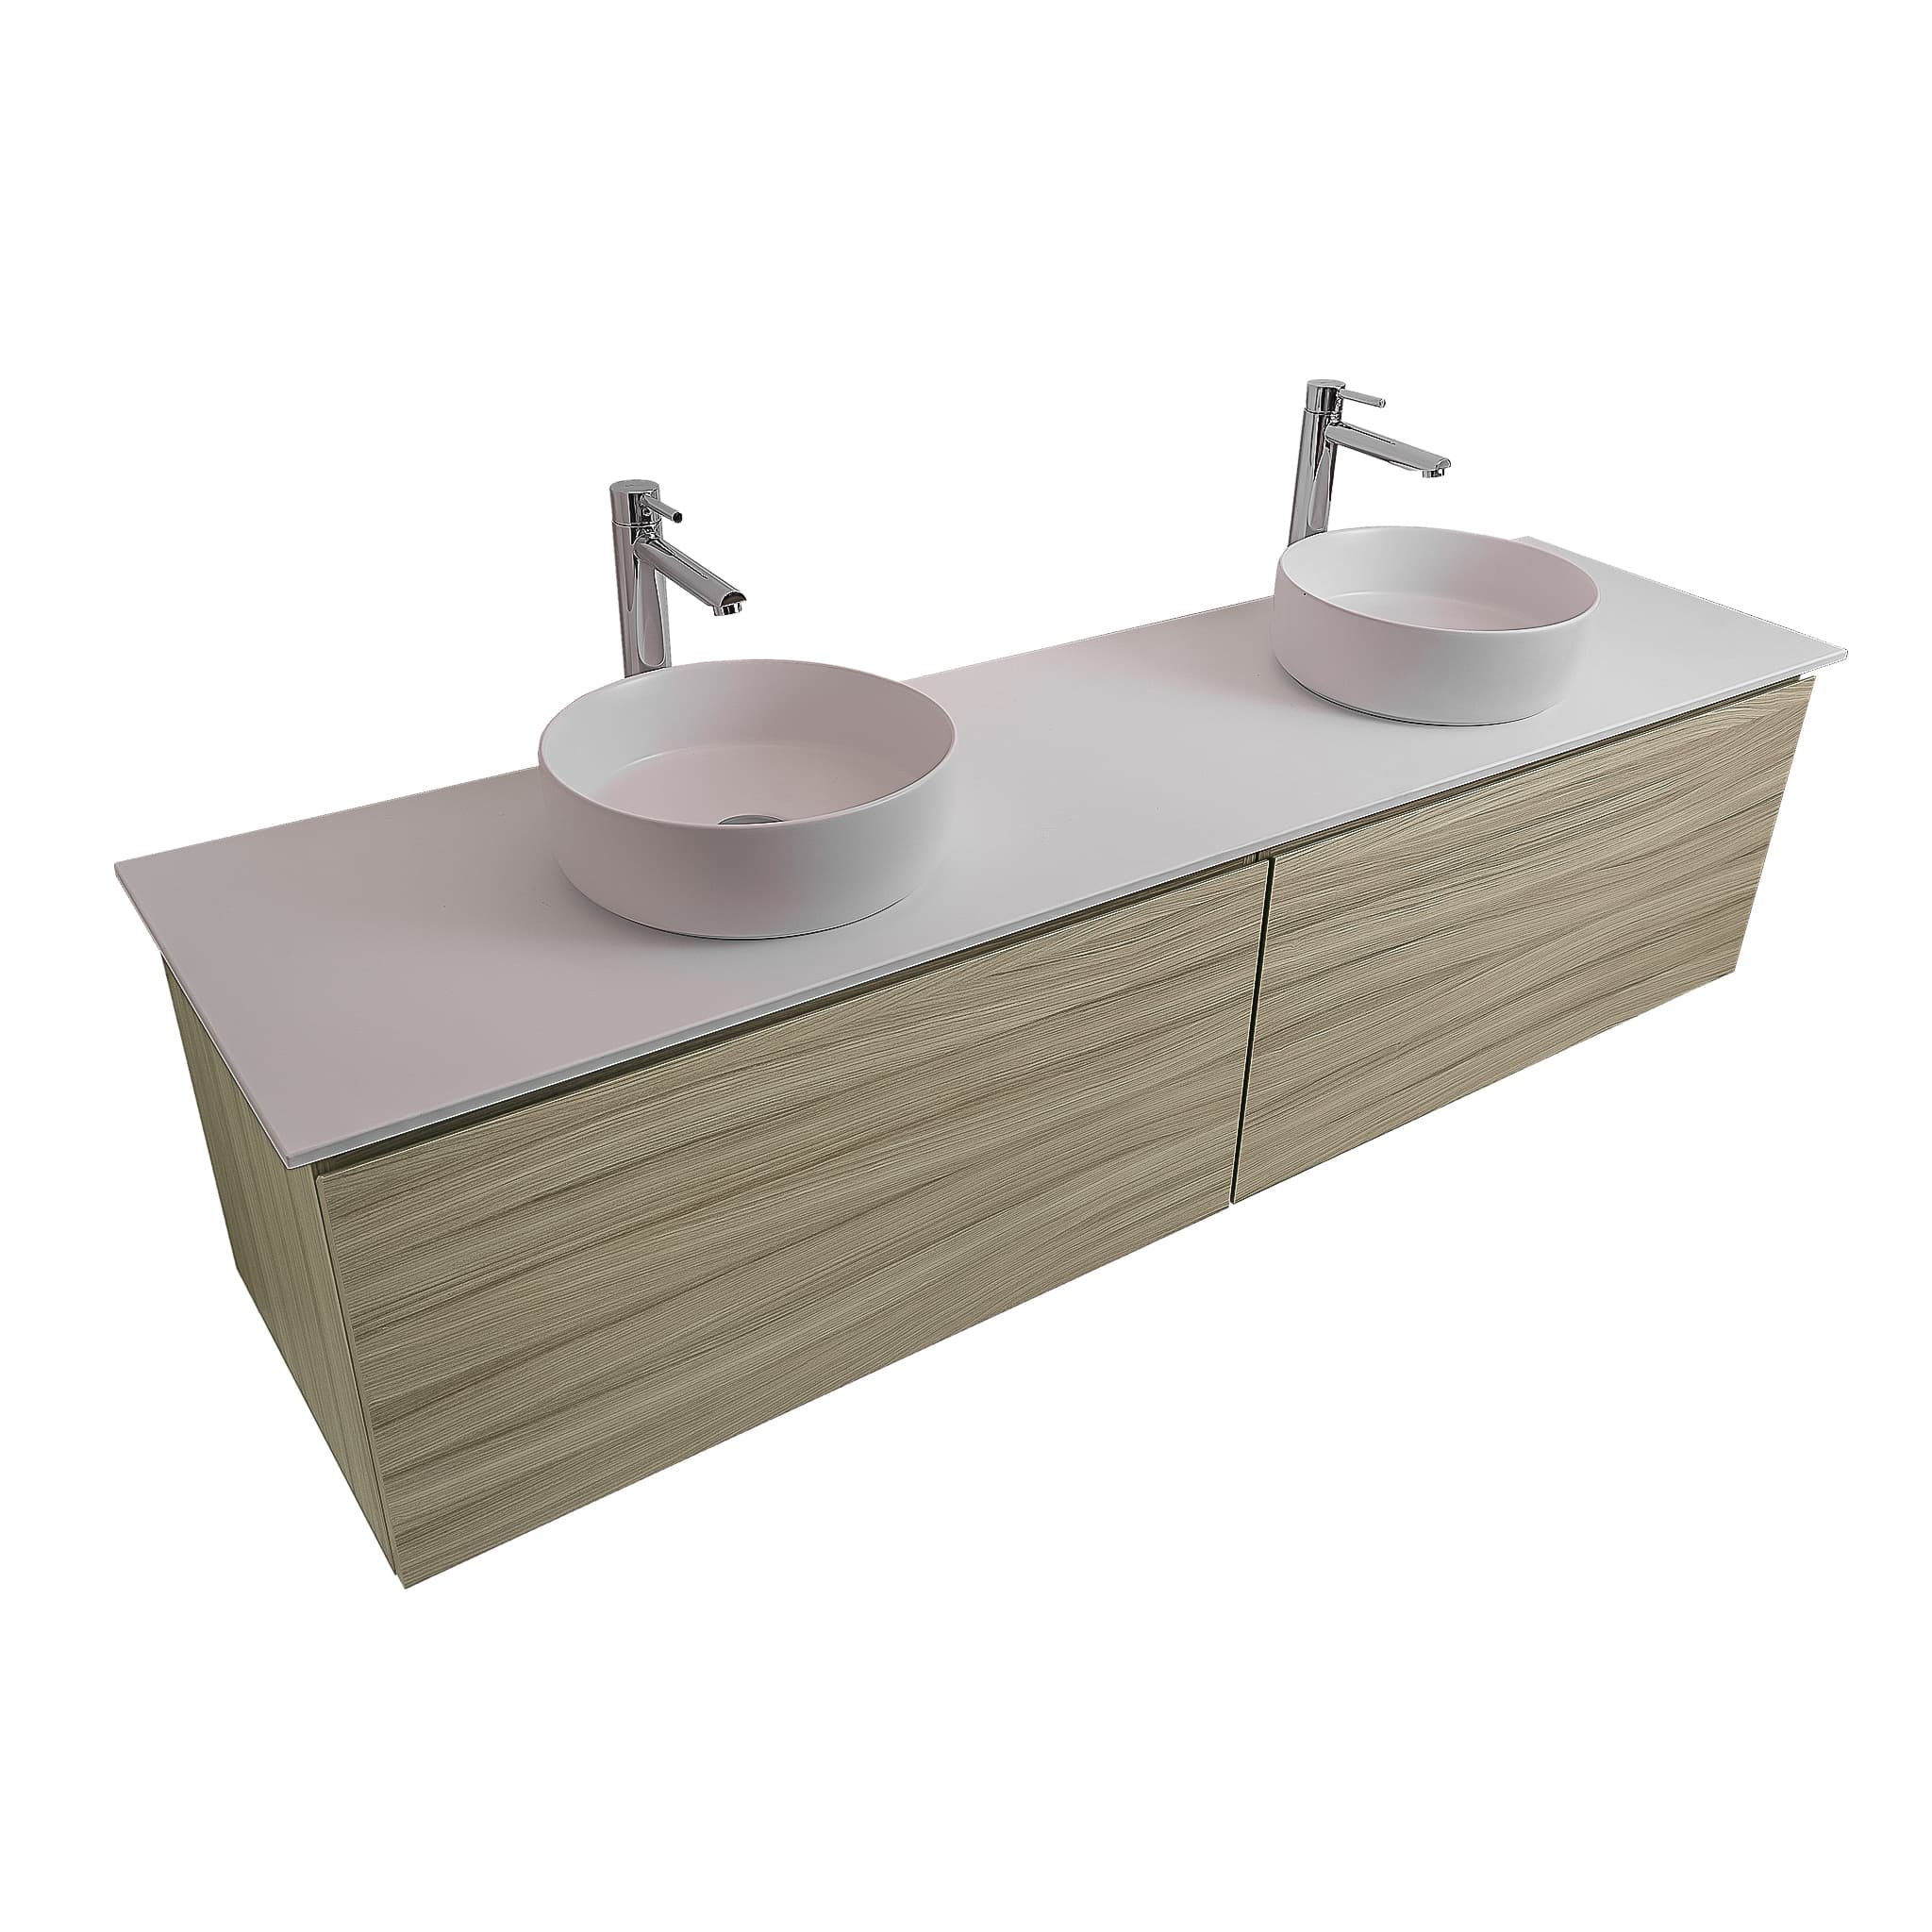 Venice 63 Nilo Grey Wood Texture Cabinet, Ares White Top And Two Ares White Ceramic Basin, Wall Mounted Modern Vanity Set